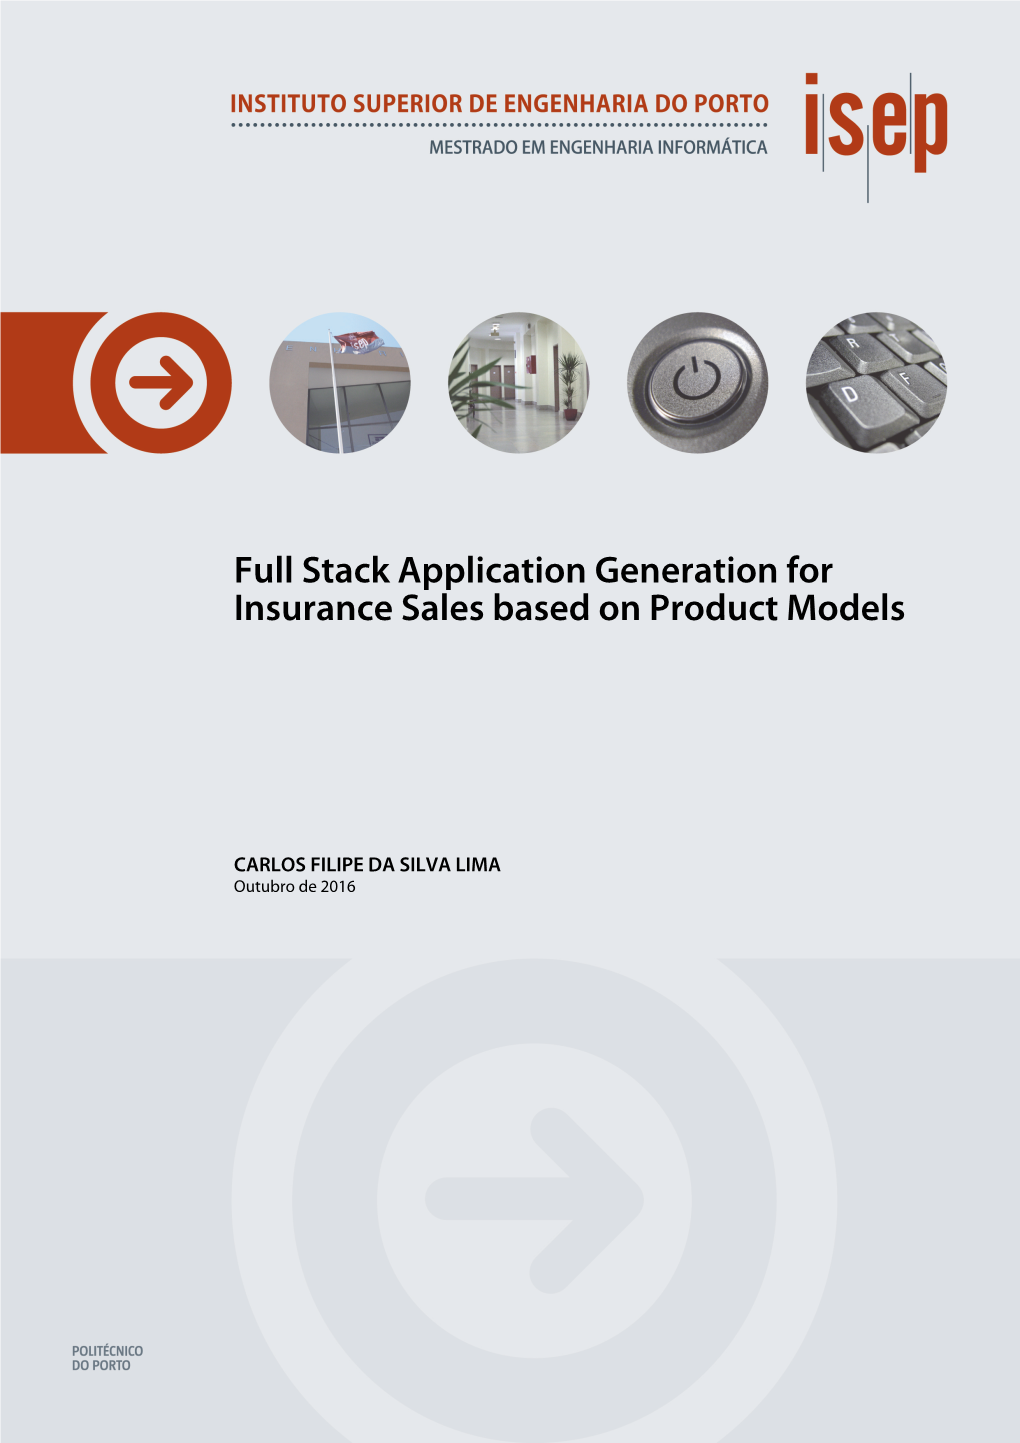 Full Stack Application Generation for Insurance Sales Based on Product Models